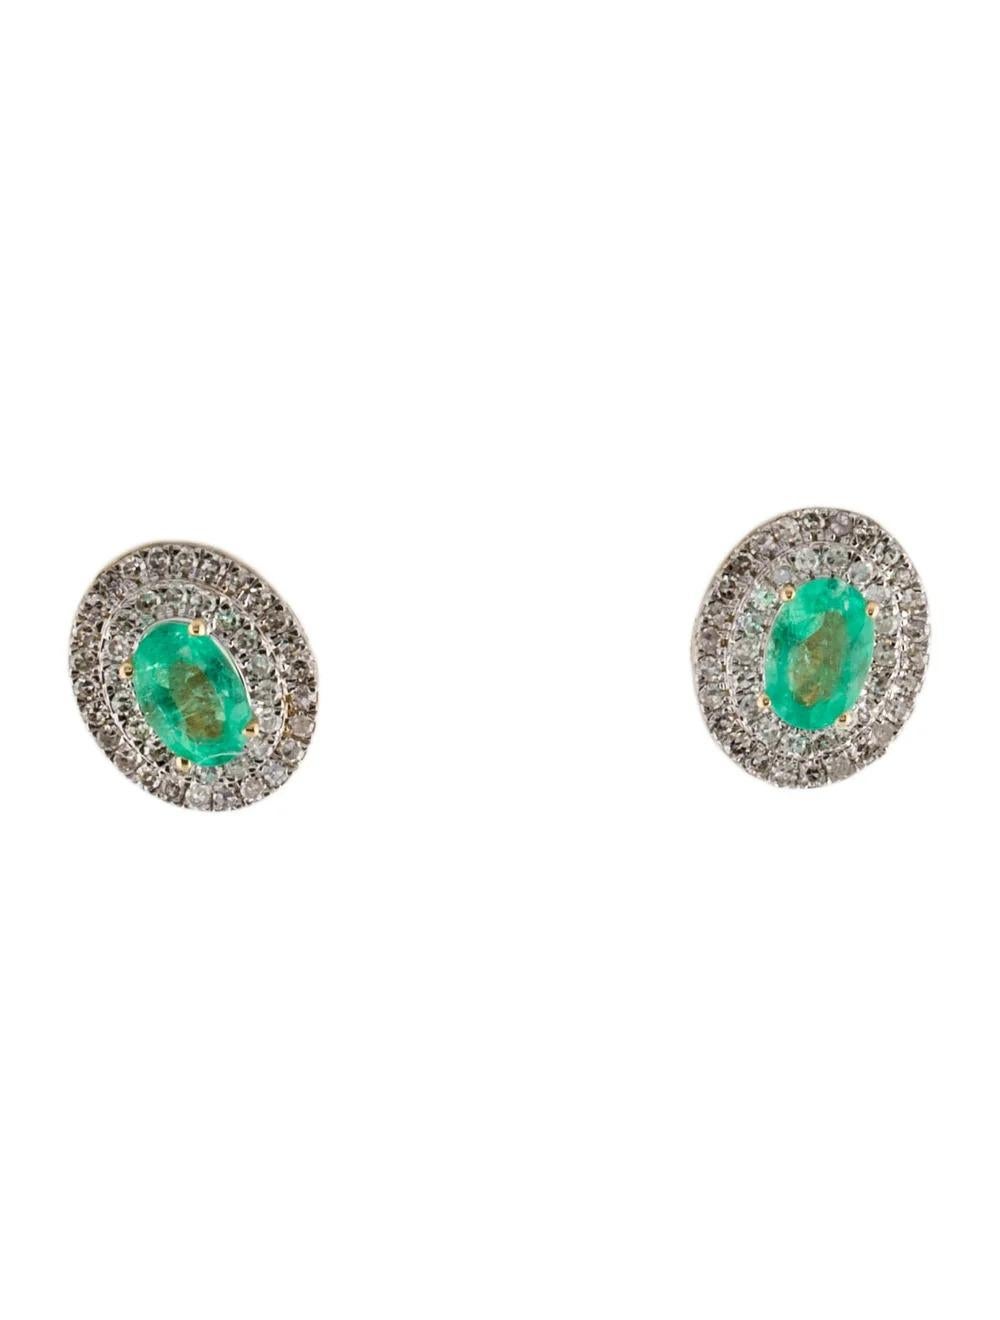 Experience timeless elegance with these stunning 14K Yellow Gold Emerald and Diamond Stud Earrings. Crafted to perfection, these earrings feature exquisite gemstones set in luxurious gold, promising to elevate any ensemble with sophistication and